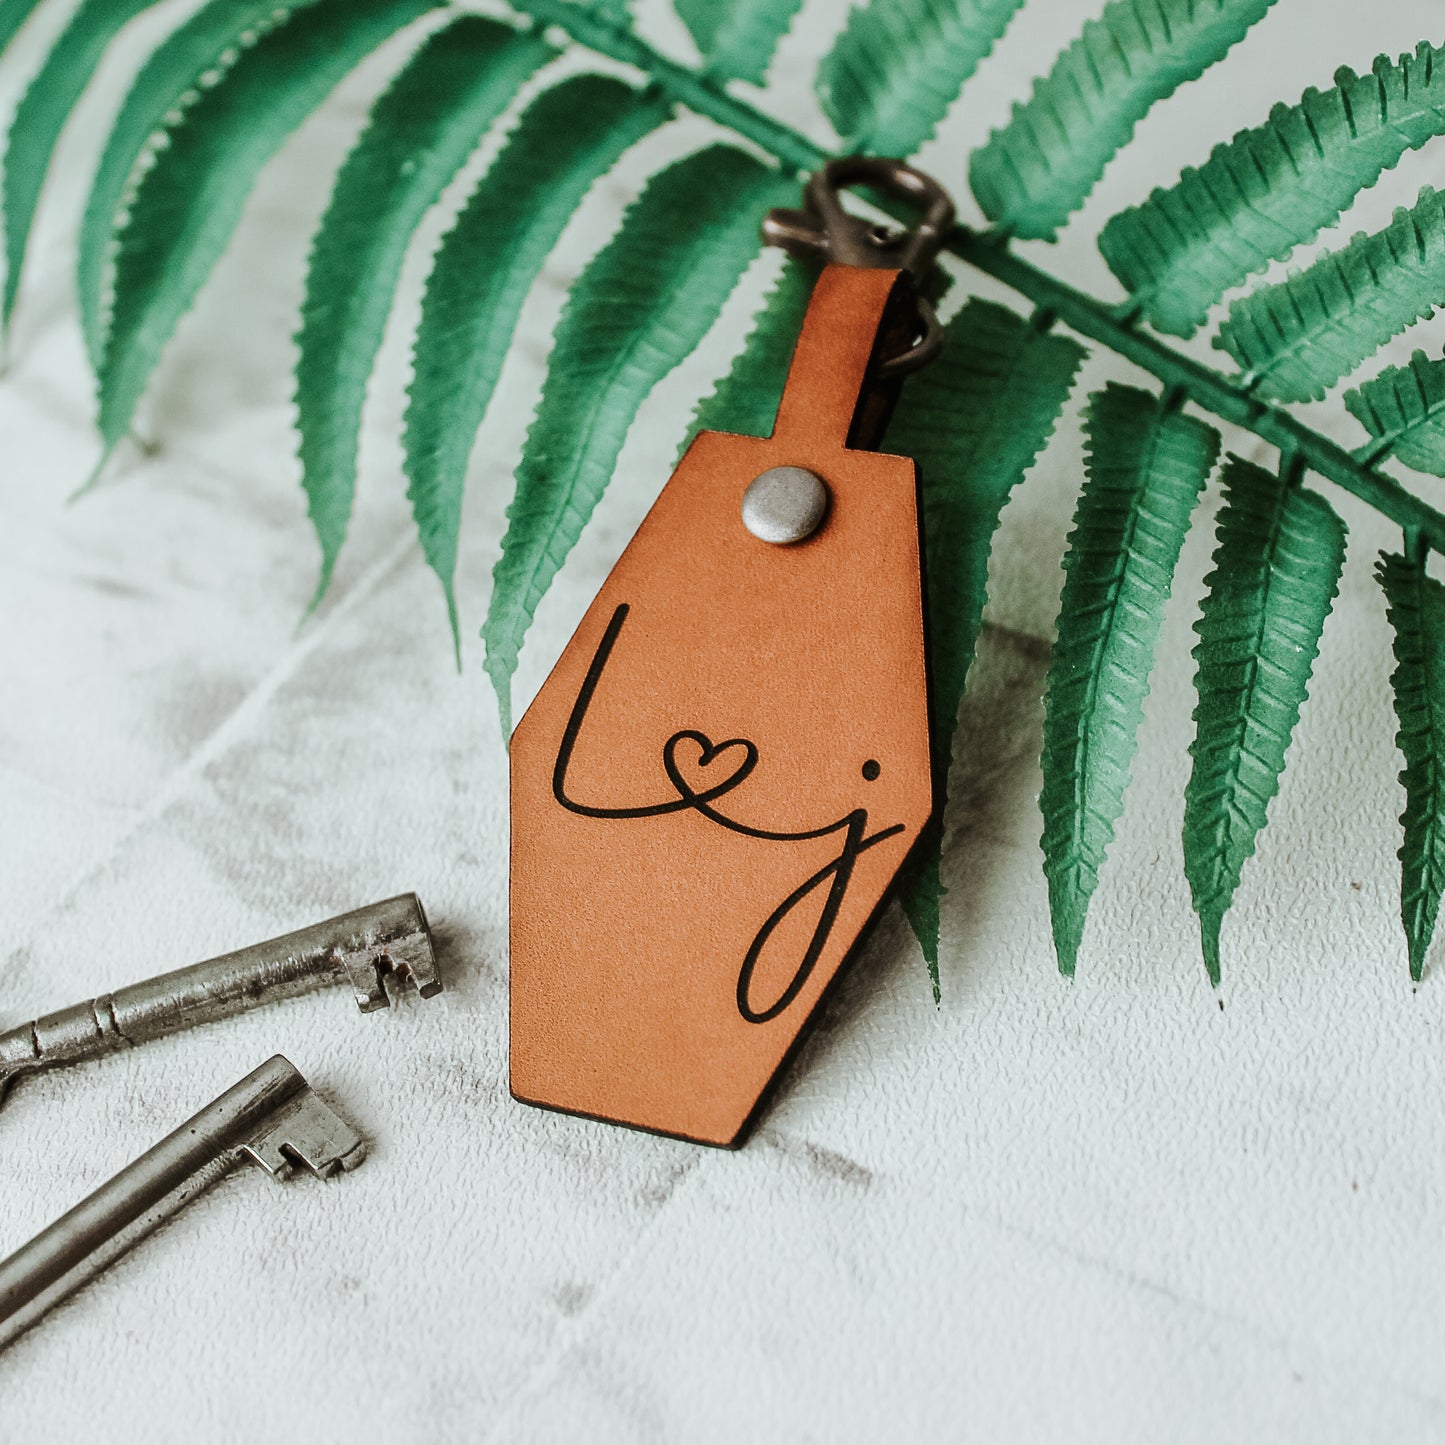 whisky coloured brown leather keyring with initials engraved on it connected by a heart design. with a swivel clasp attached to clip onto keys or a bag